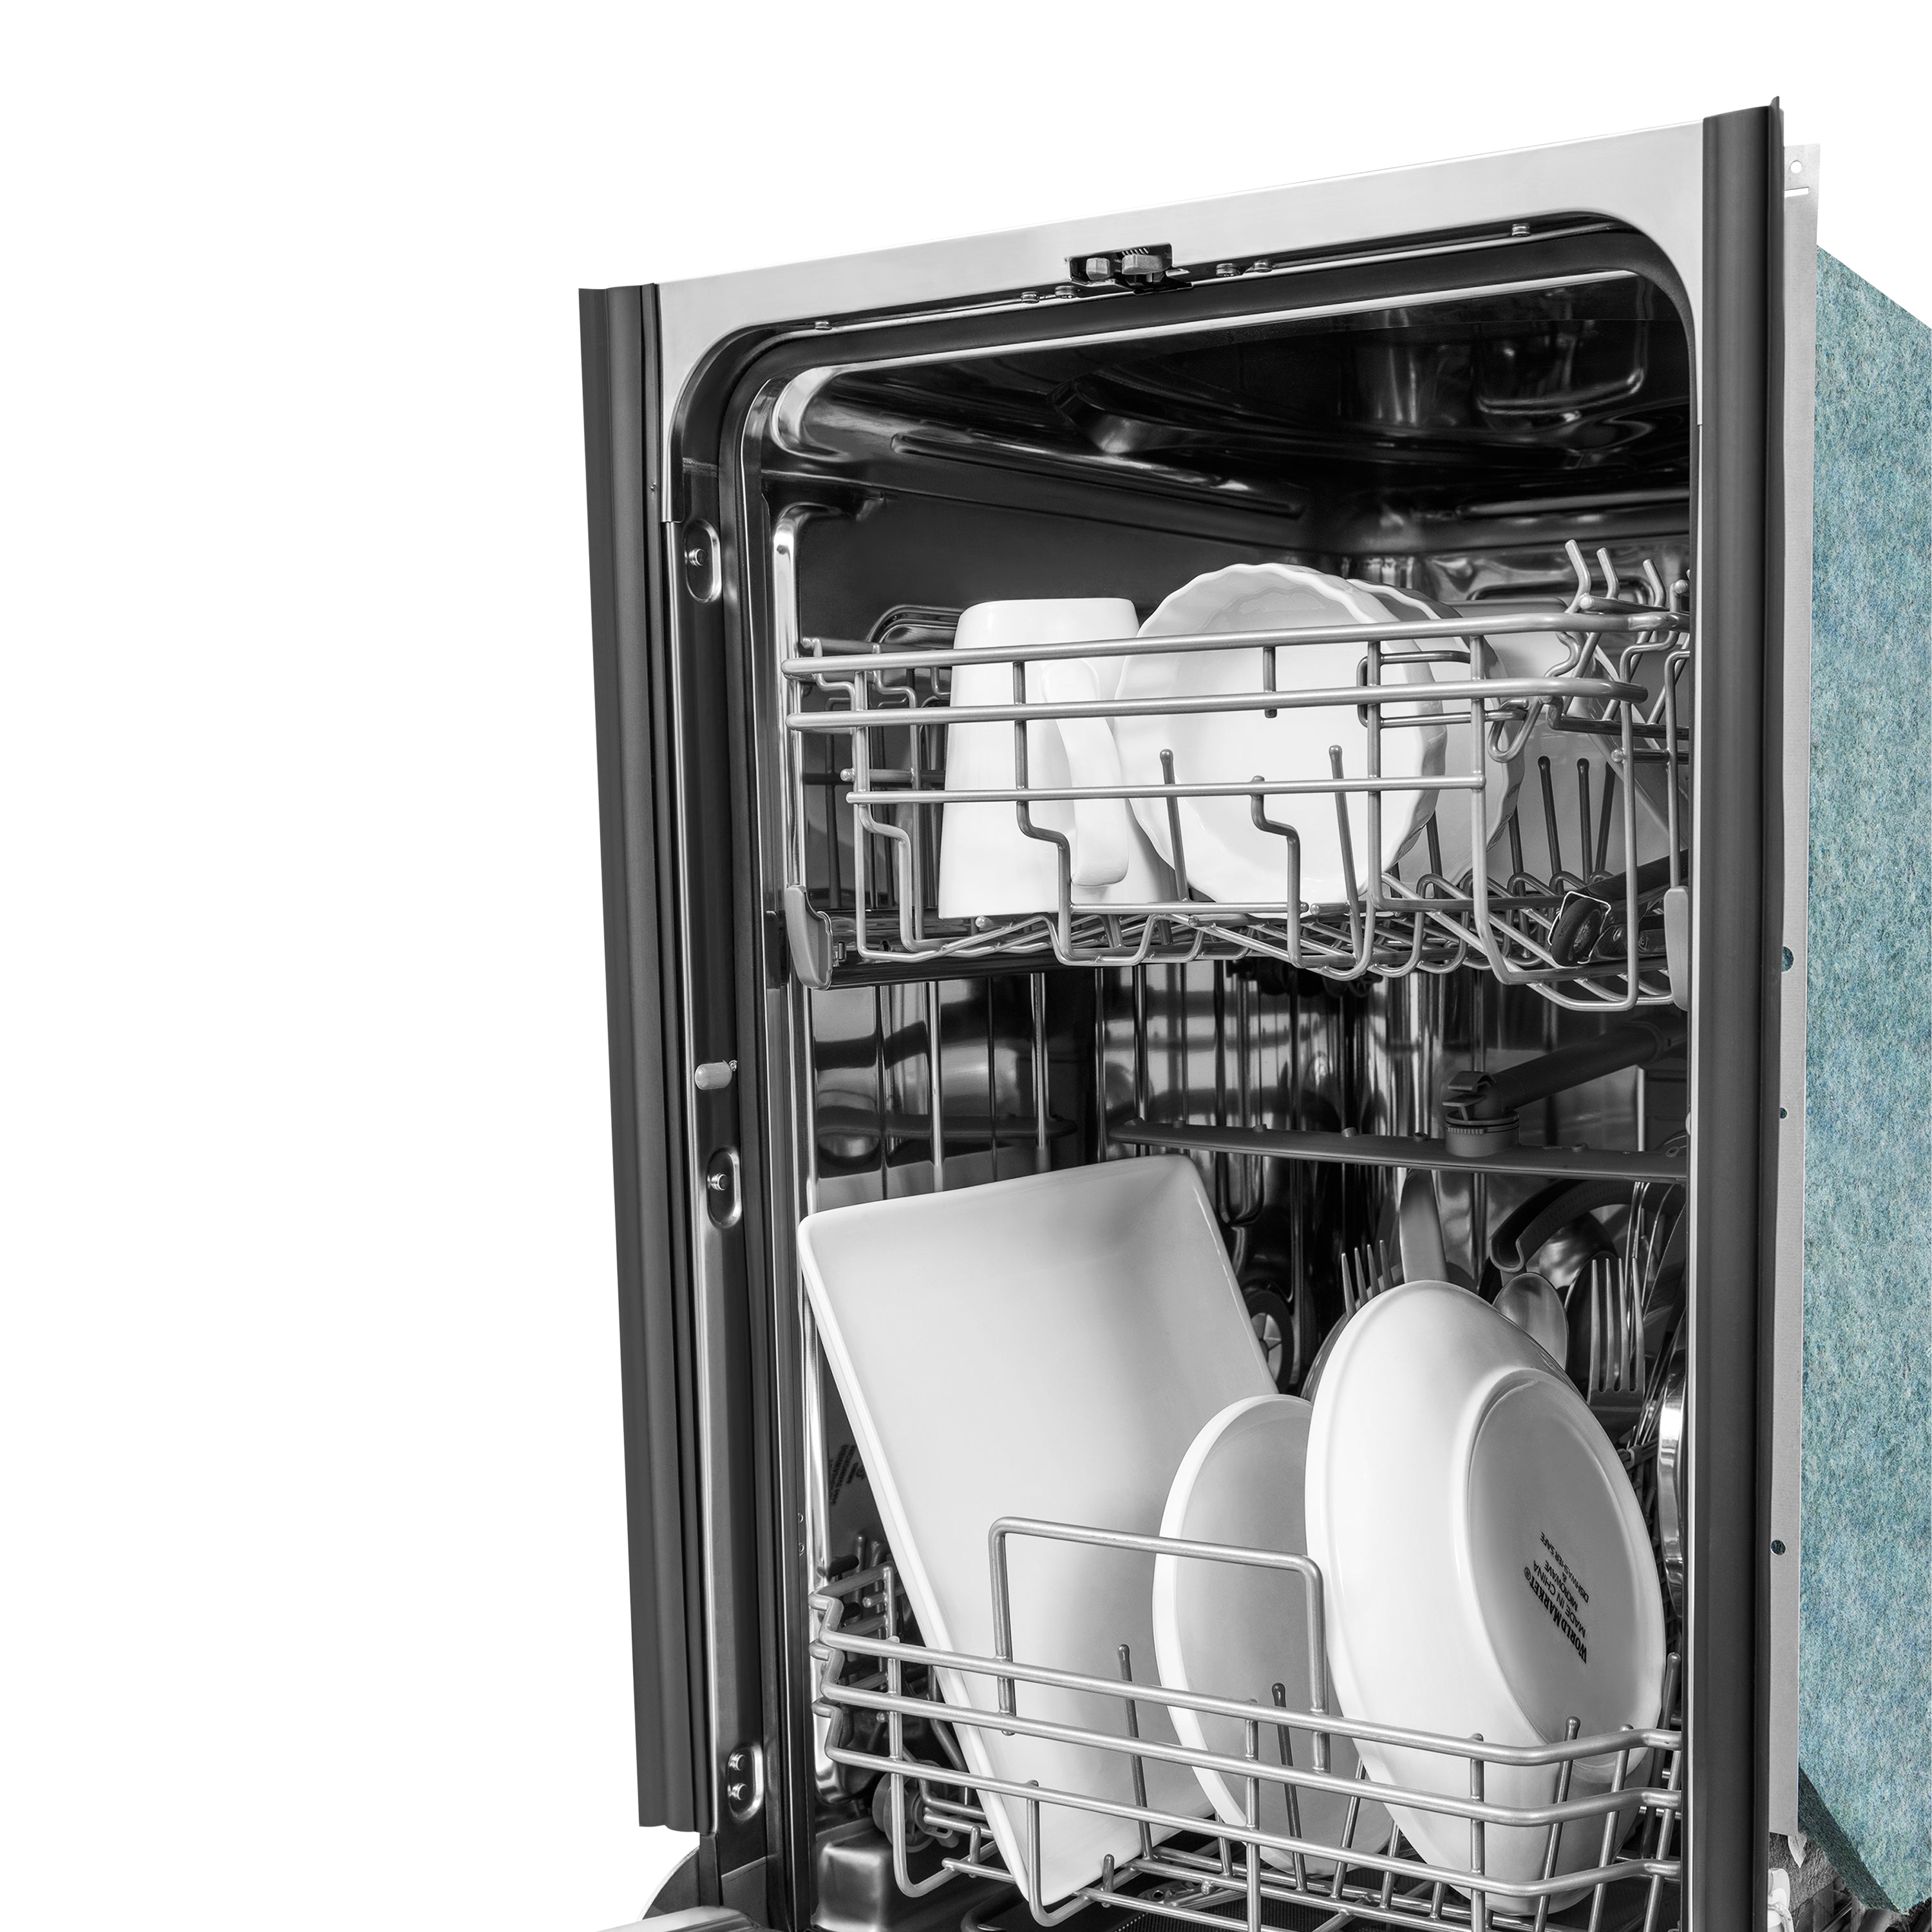 ZLINE 18 in. Compact Panel Ready Top Control Built-In Dishwasher with Stainless Steel Tub, 52dBa